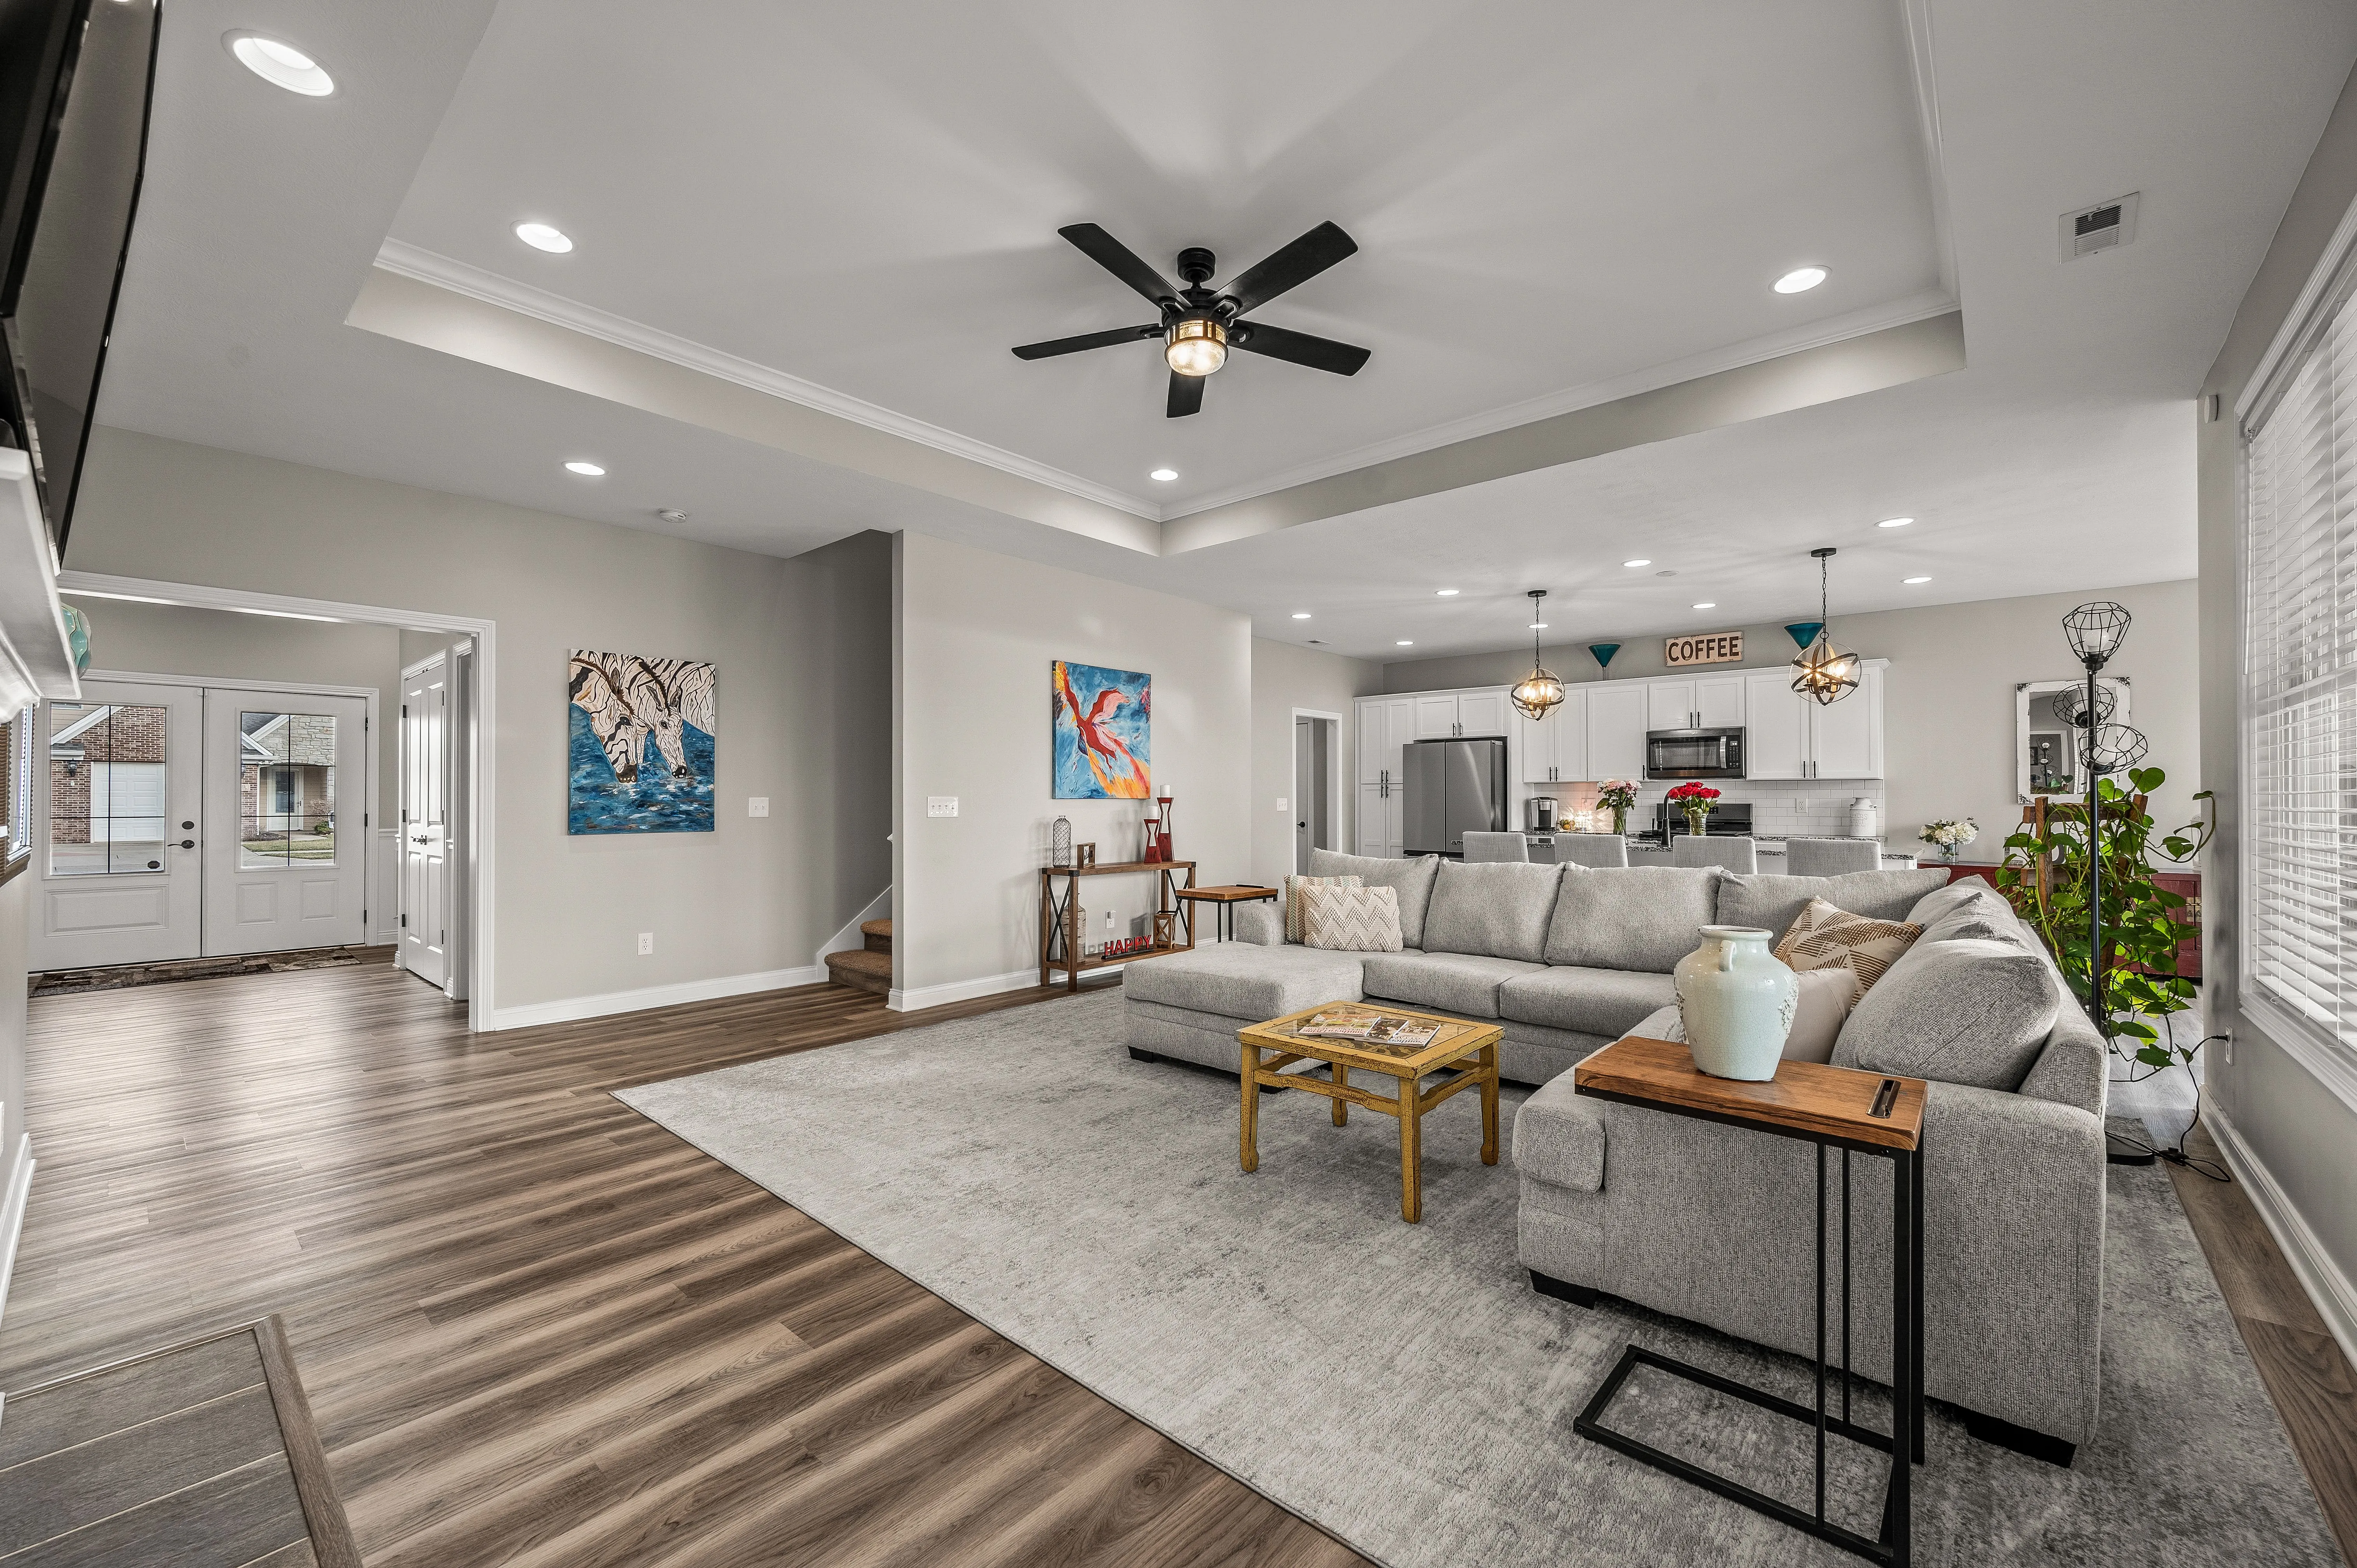 Spacious modern living room seamlessly transitioning into kitchen area with contemporary furniture and decor, hardwood flooring, and ample natural light.